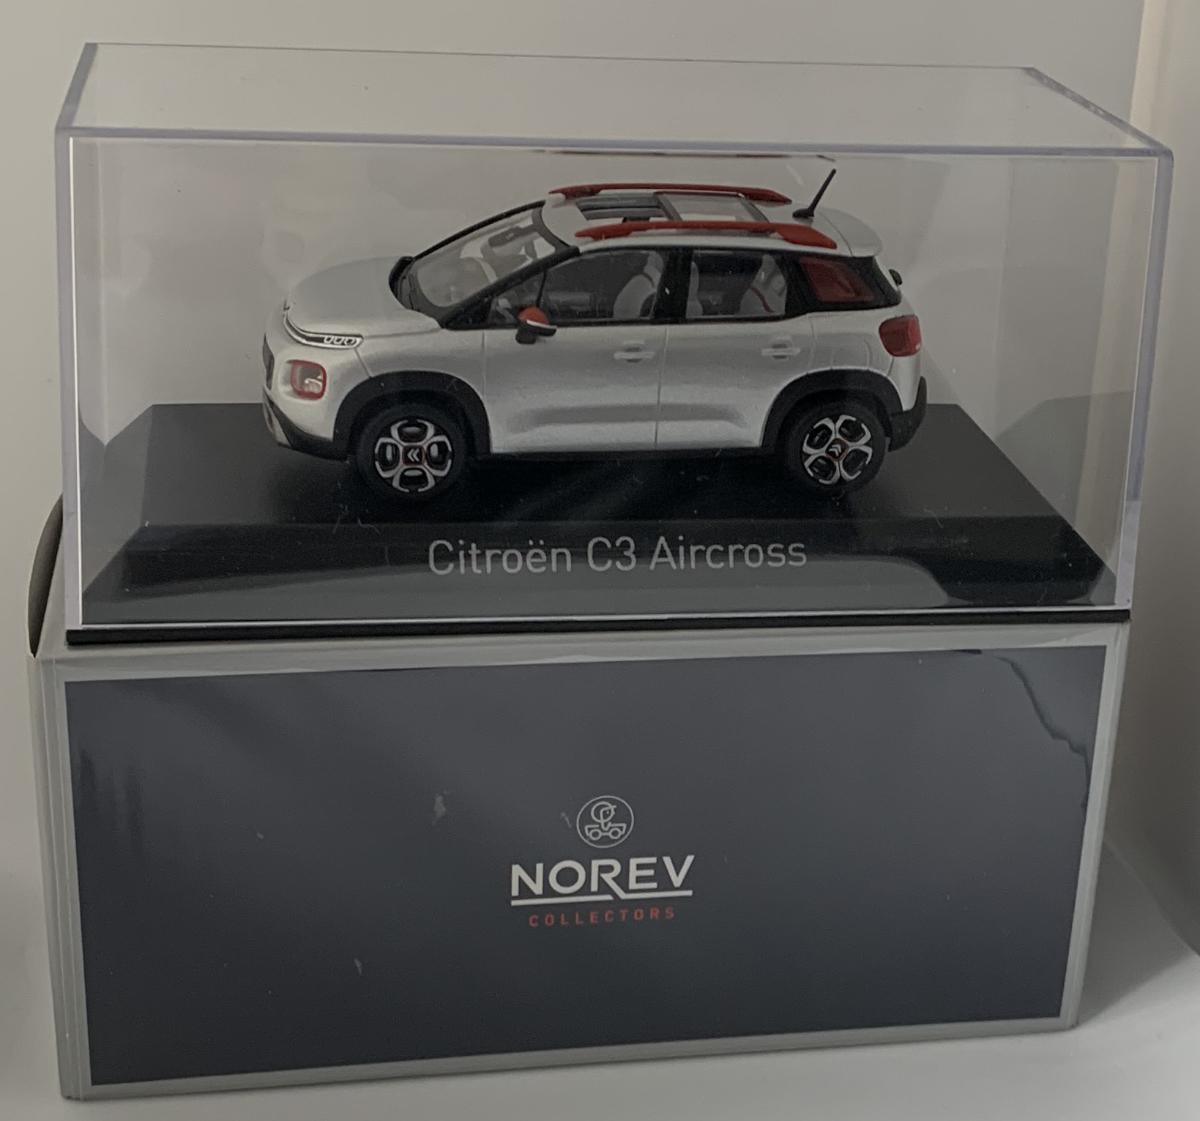 Citroen C3 Aircross 2017 in cosmic silver 1:43 scale model from Norev